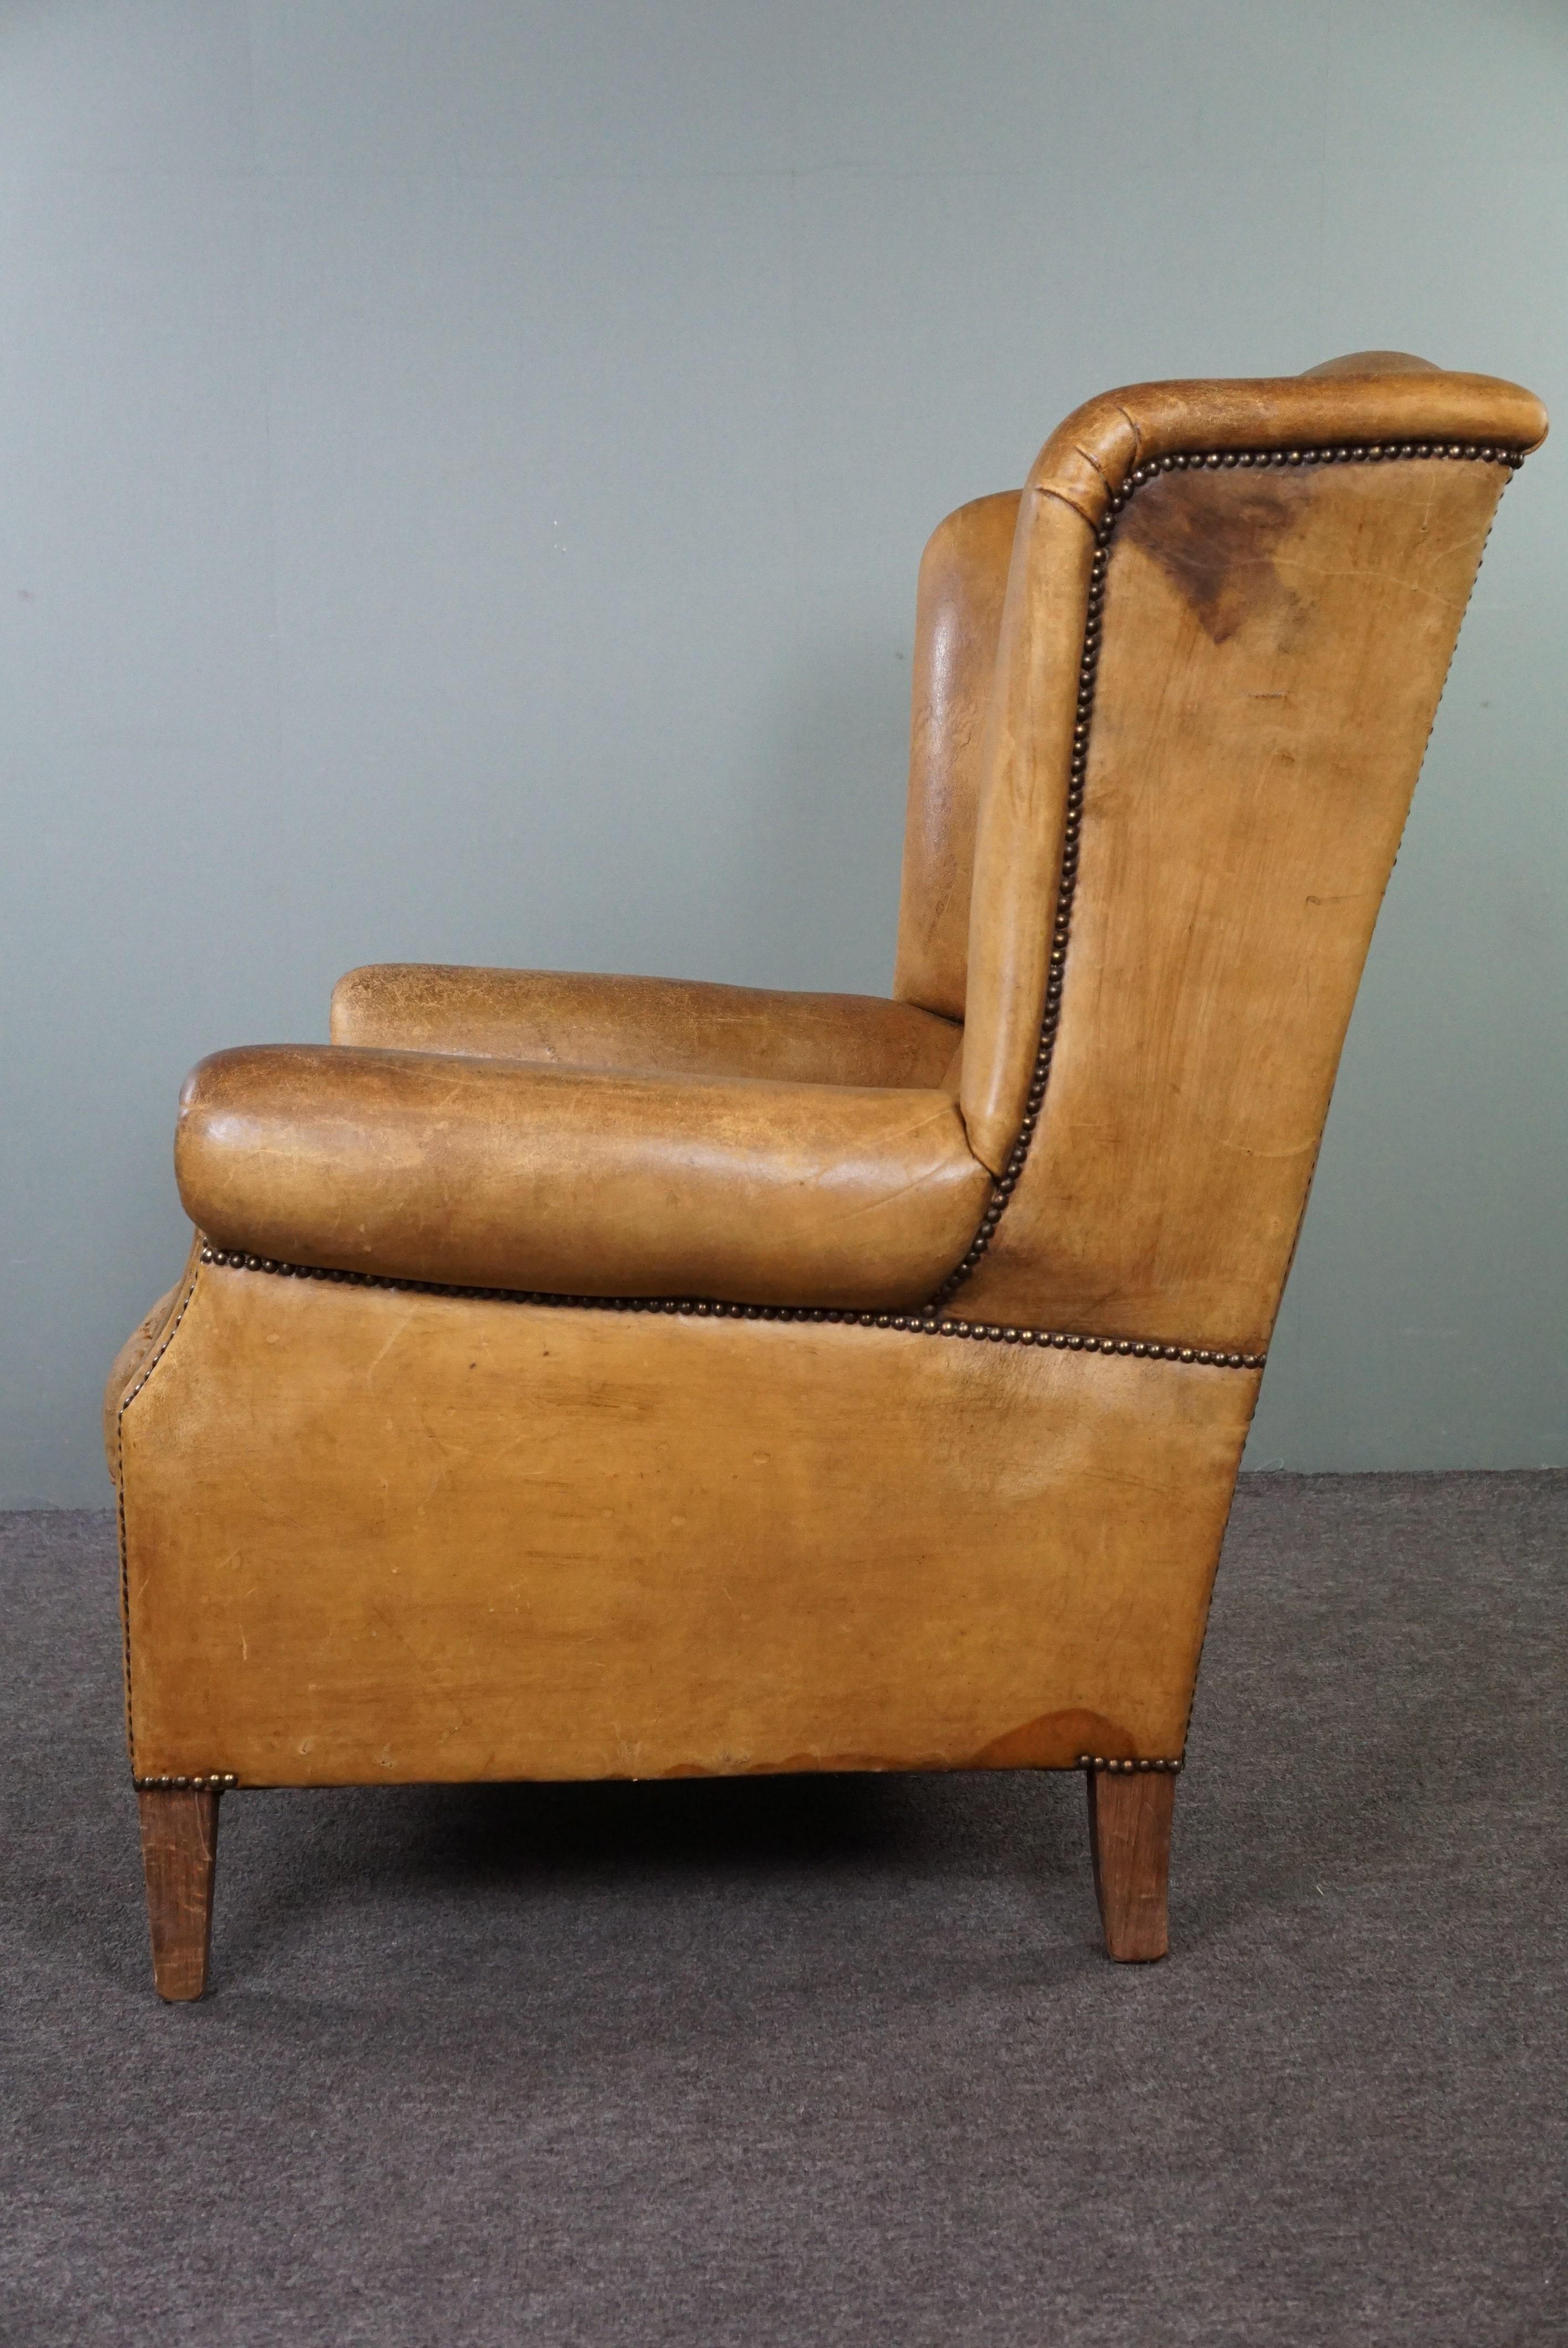 Leather Stylish, lived-in light-colored sheepskin wingback chair For Sale